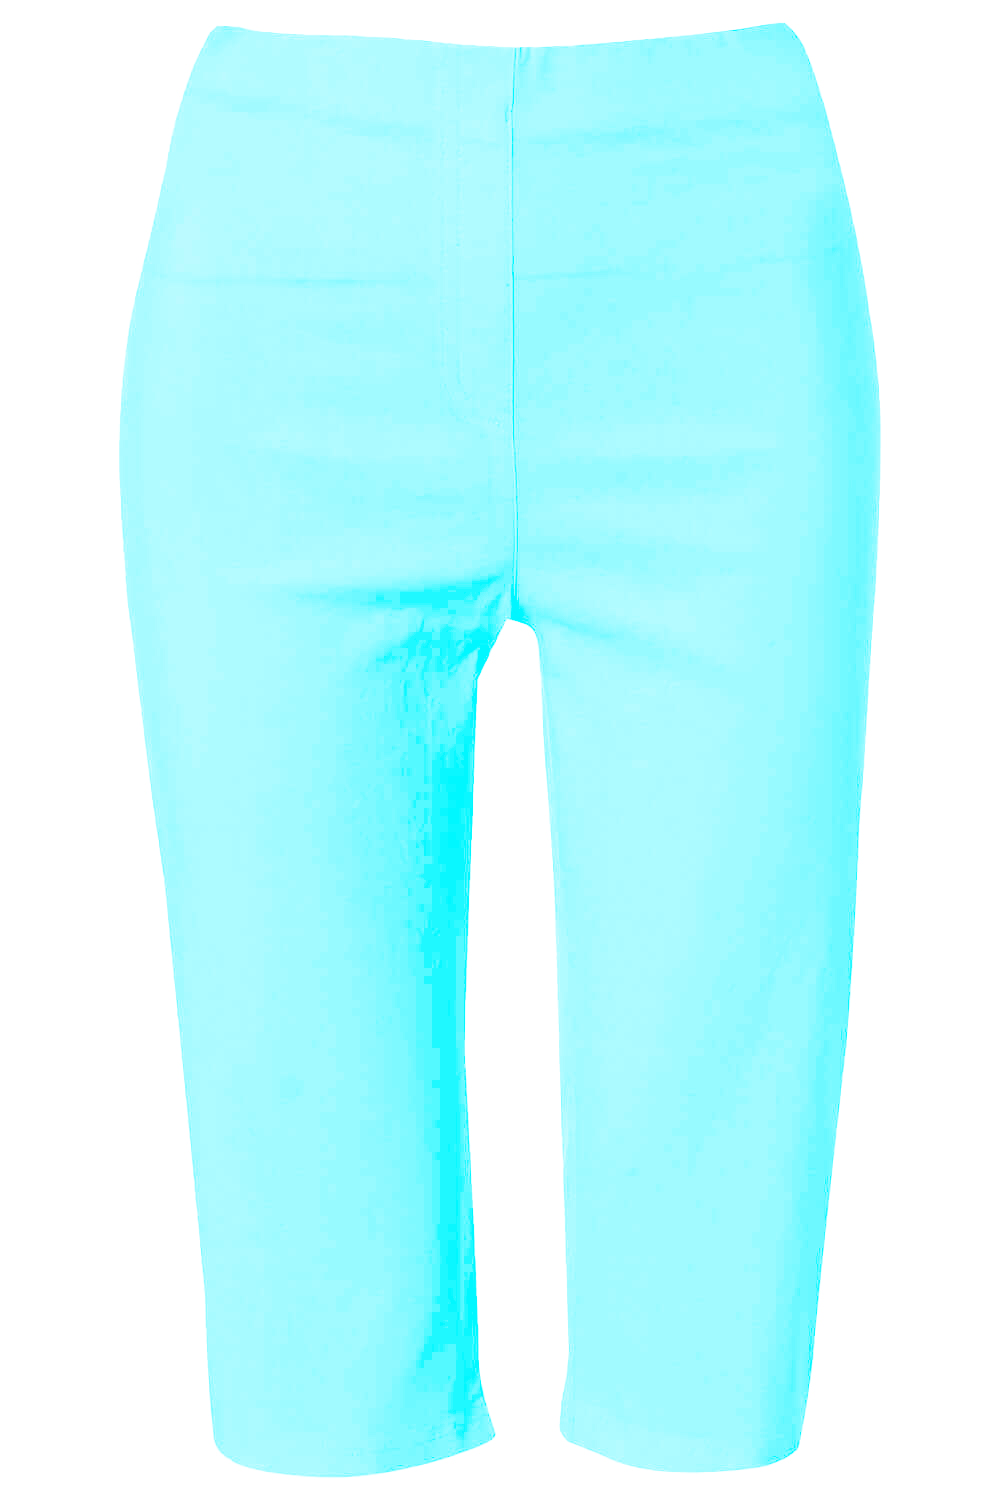 Turquoise Knee Length Stretch Shorts, Image 6 of 6